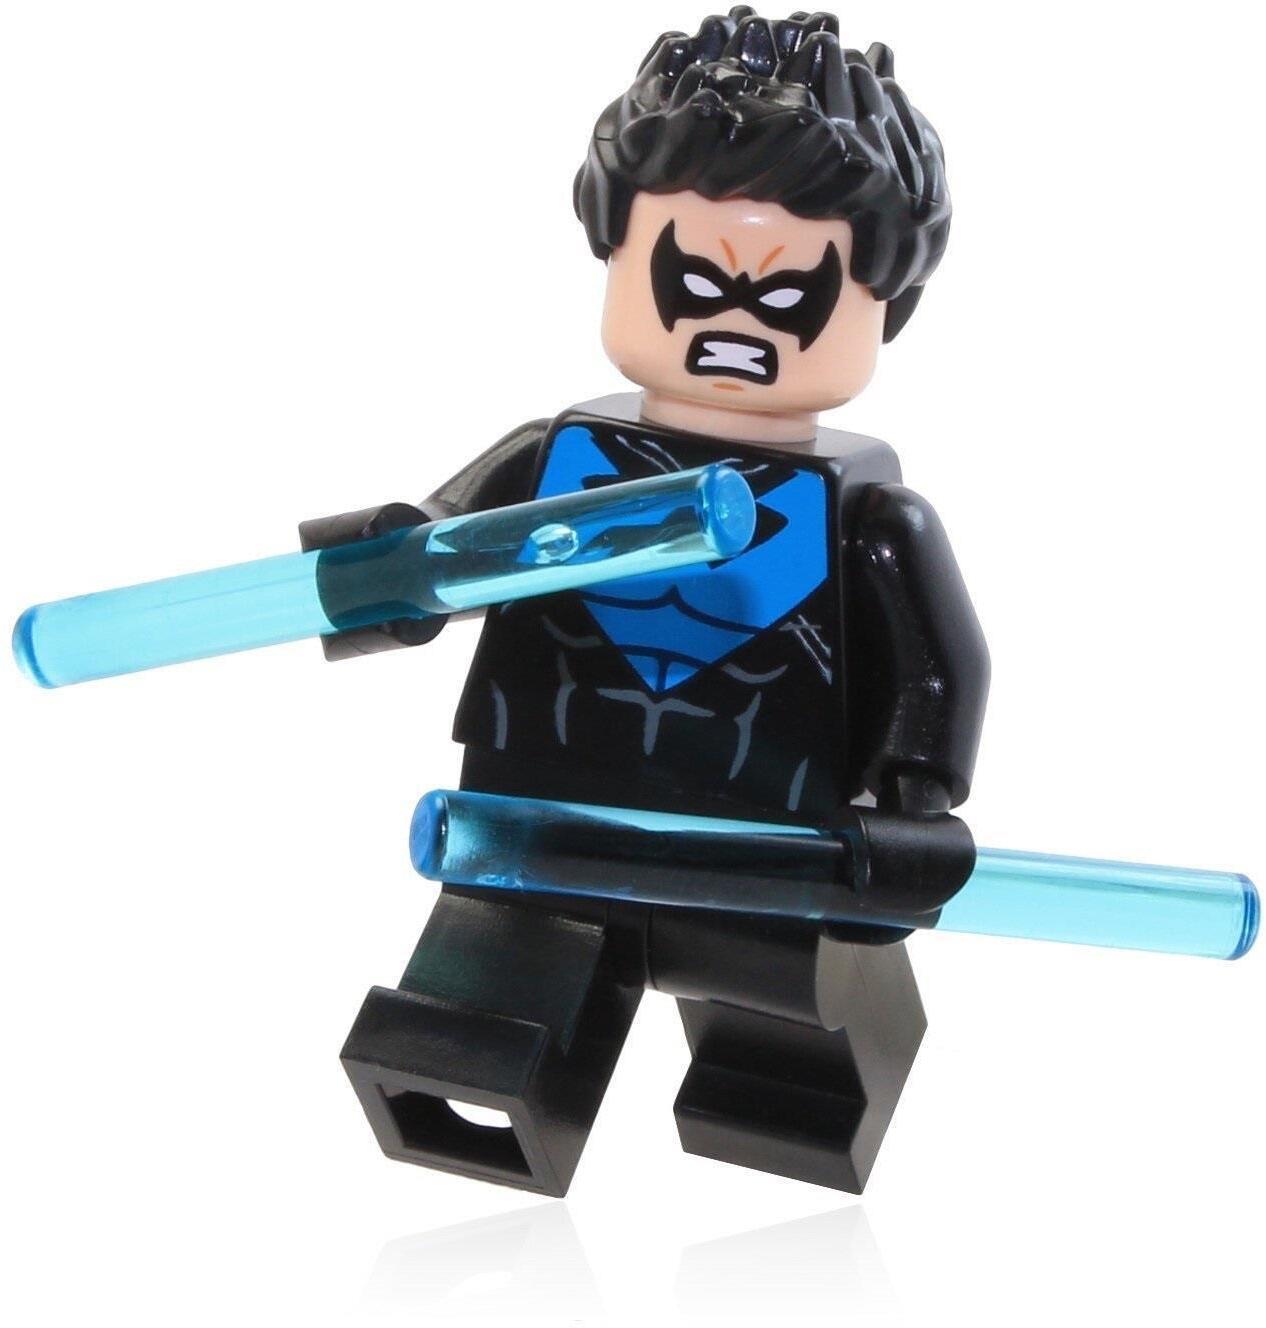 LEGO DC Comics Super Heroes Nightwing 30606 Polybag MINT for sale online 